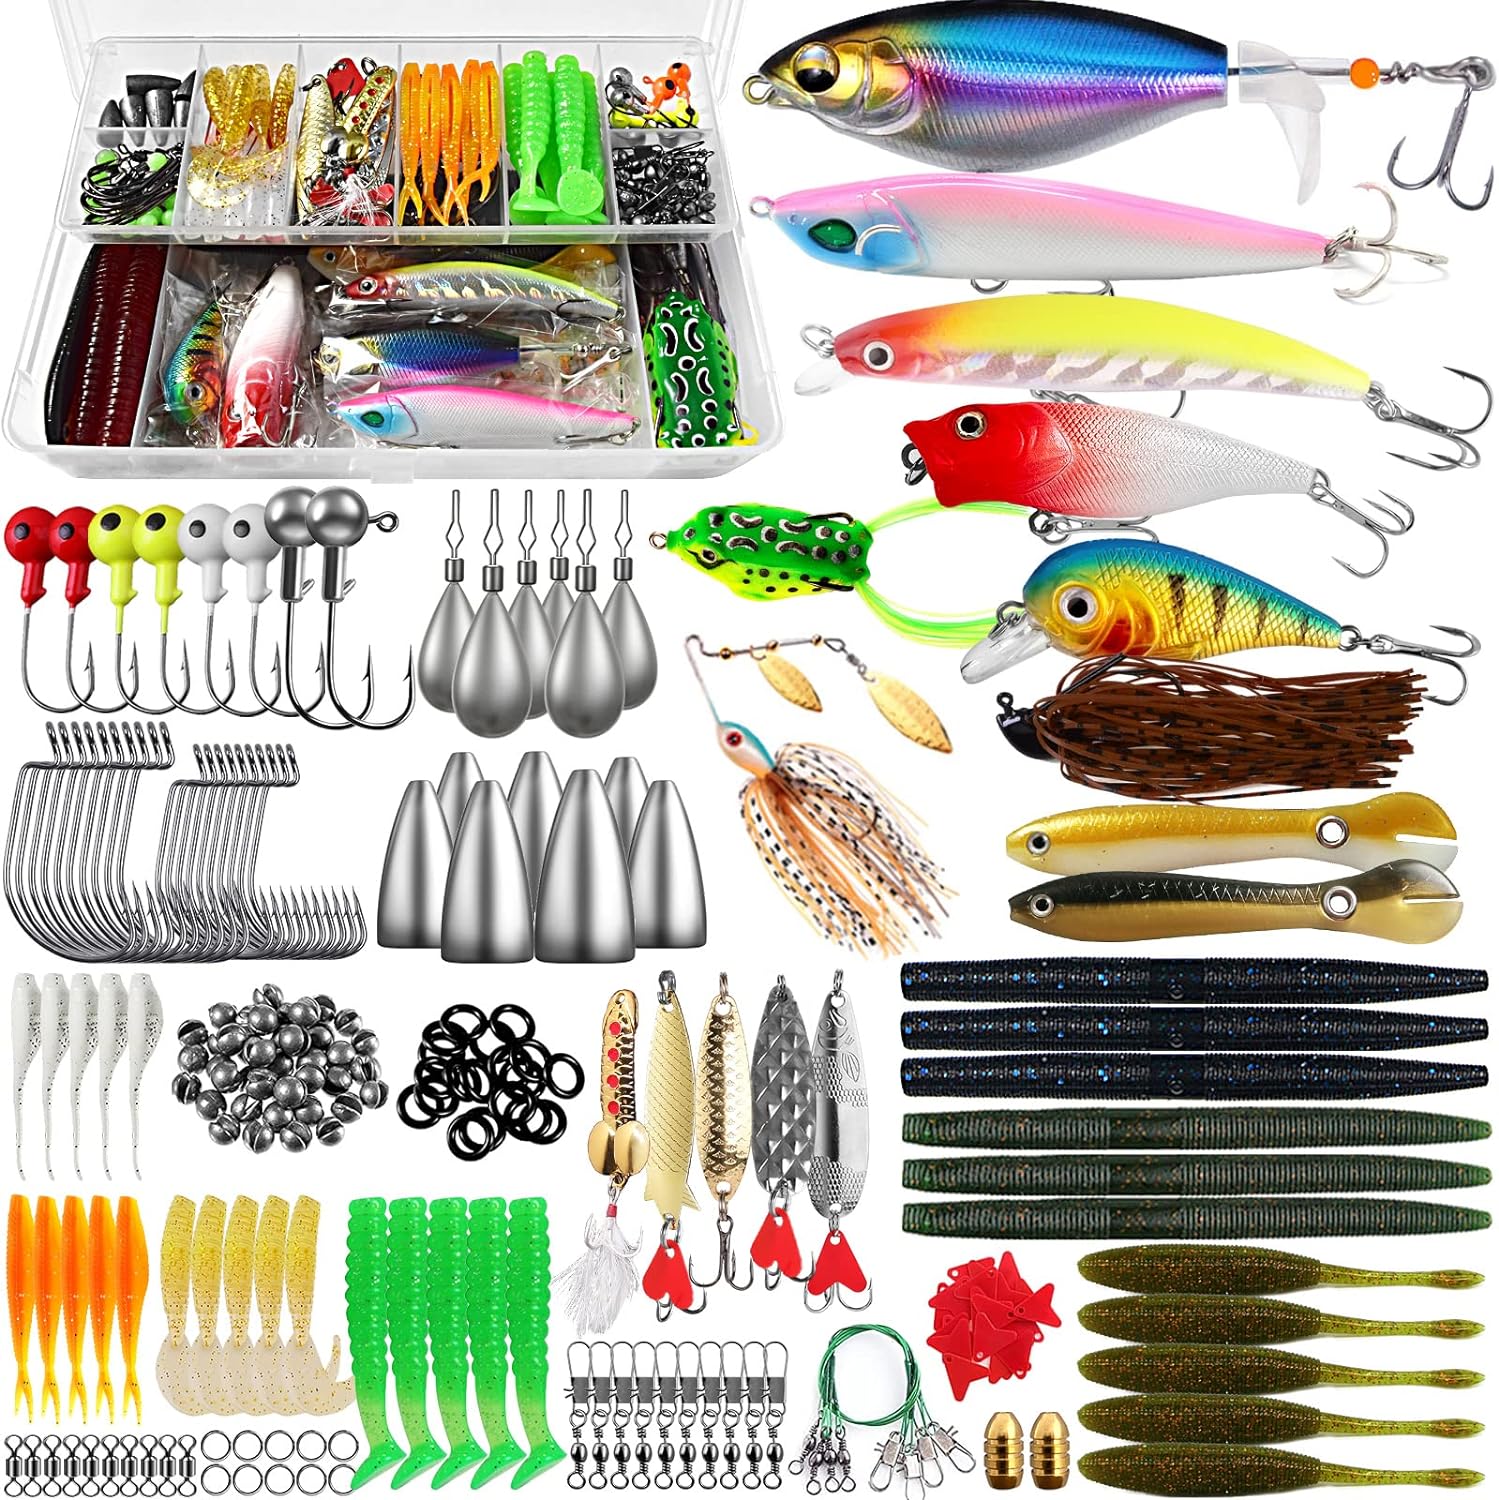 Fishing Lures Baits Tackle Fishing Accessories Kit Including Crankbaits, Spinnerbaits,Jig Hooks, Plastic Worms, Topwater Lures, Tackle Box and Fishing Gear Lures Kit Set - Fishing Lures Baits Tackle Kit Set Review